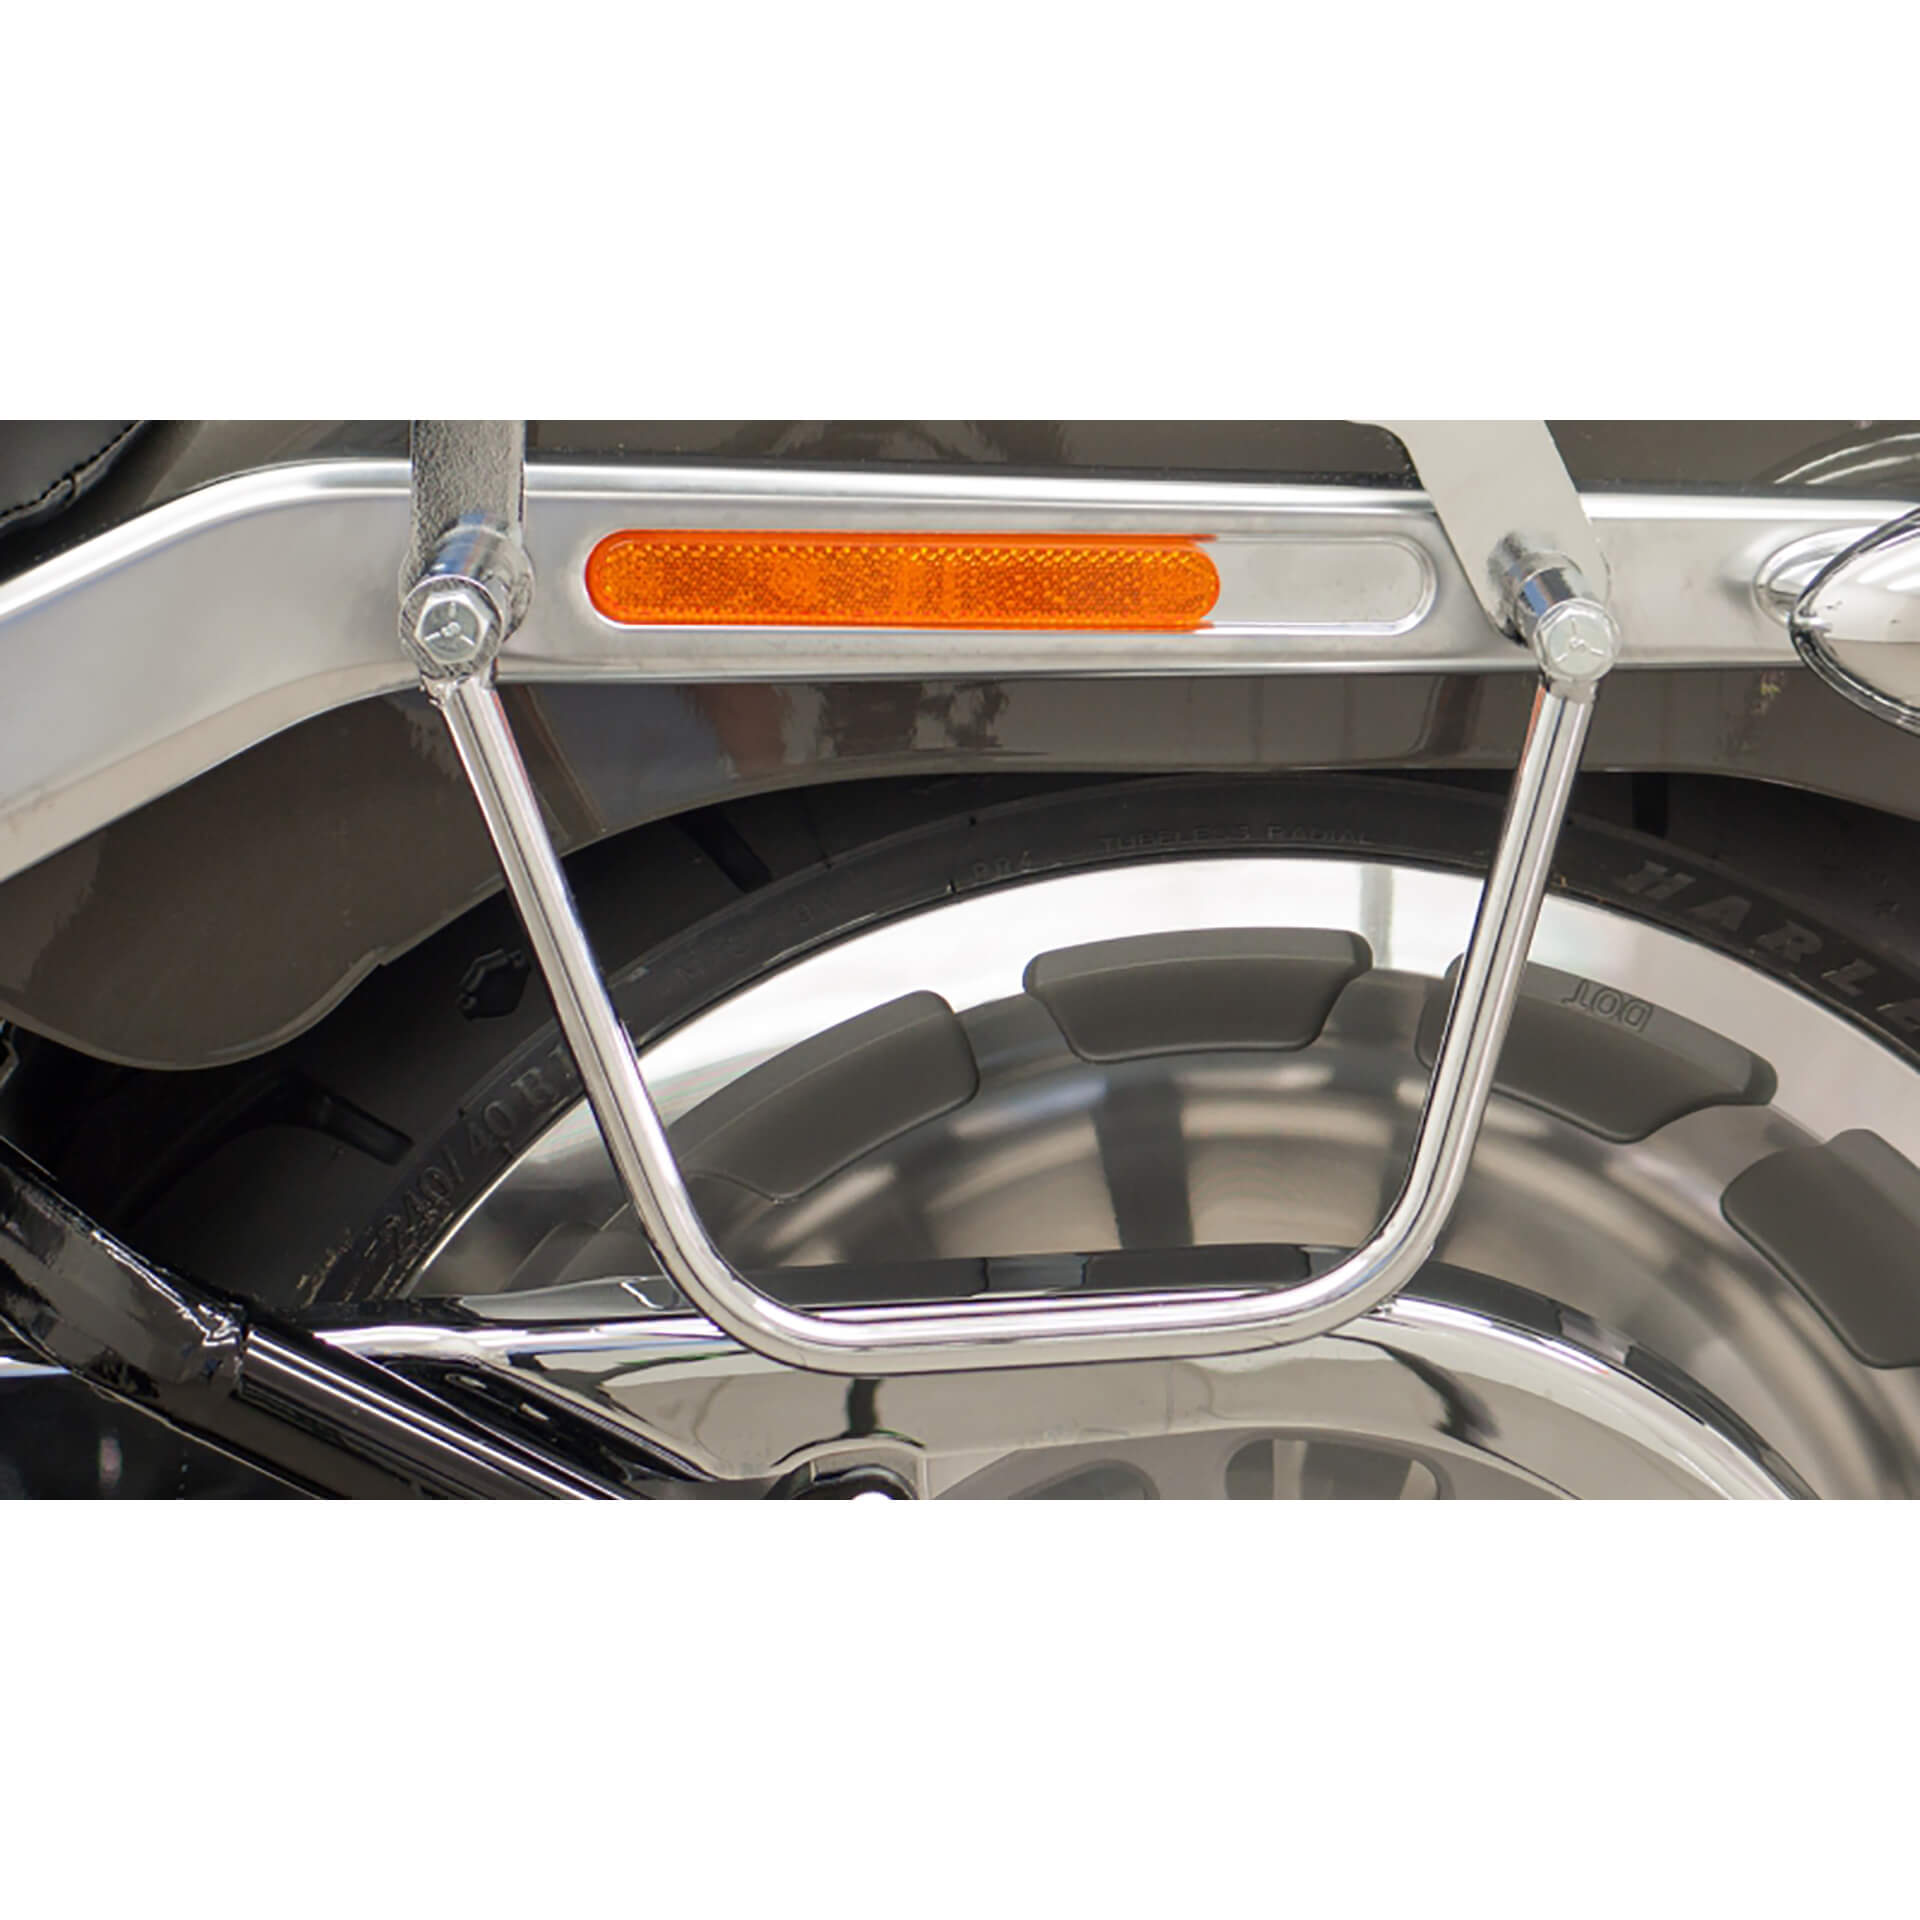 fehling Baggage hanger, HD Softail Deluxe/Softail Heritage Classic/Softail Fat Boy/Breakout